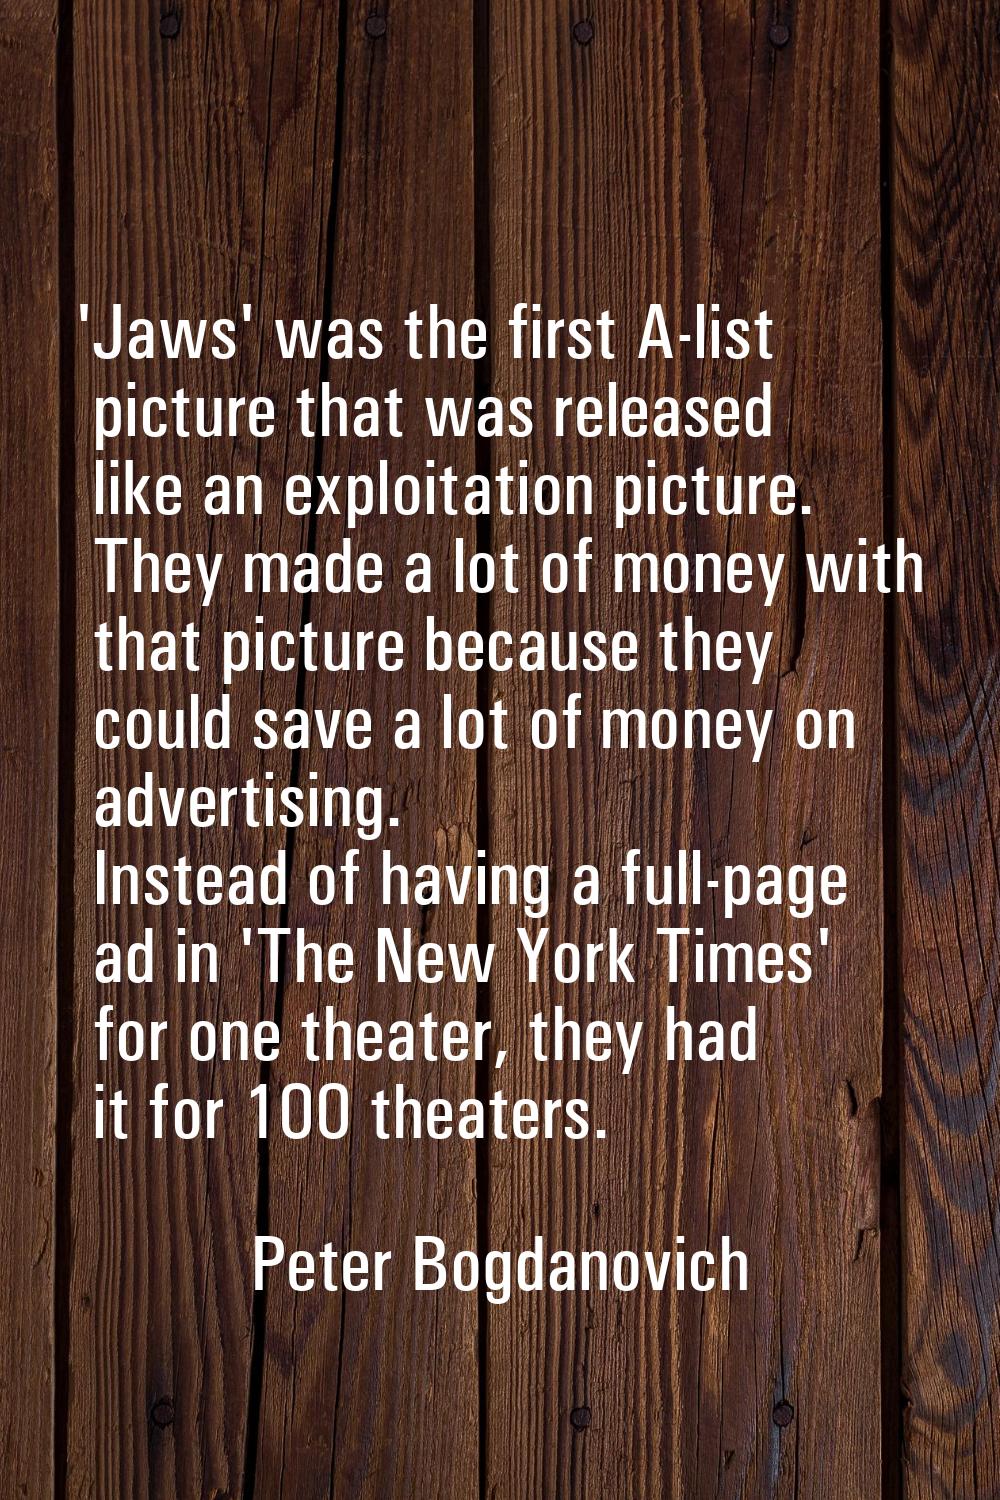 'Jaws' was the first A-list picture that was released like an exploitation picture. They made a lot